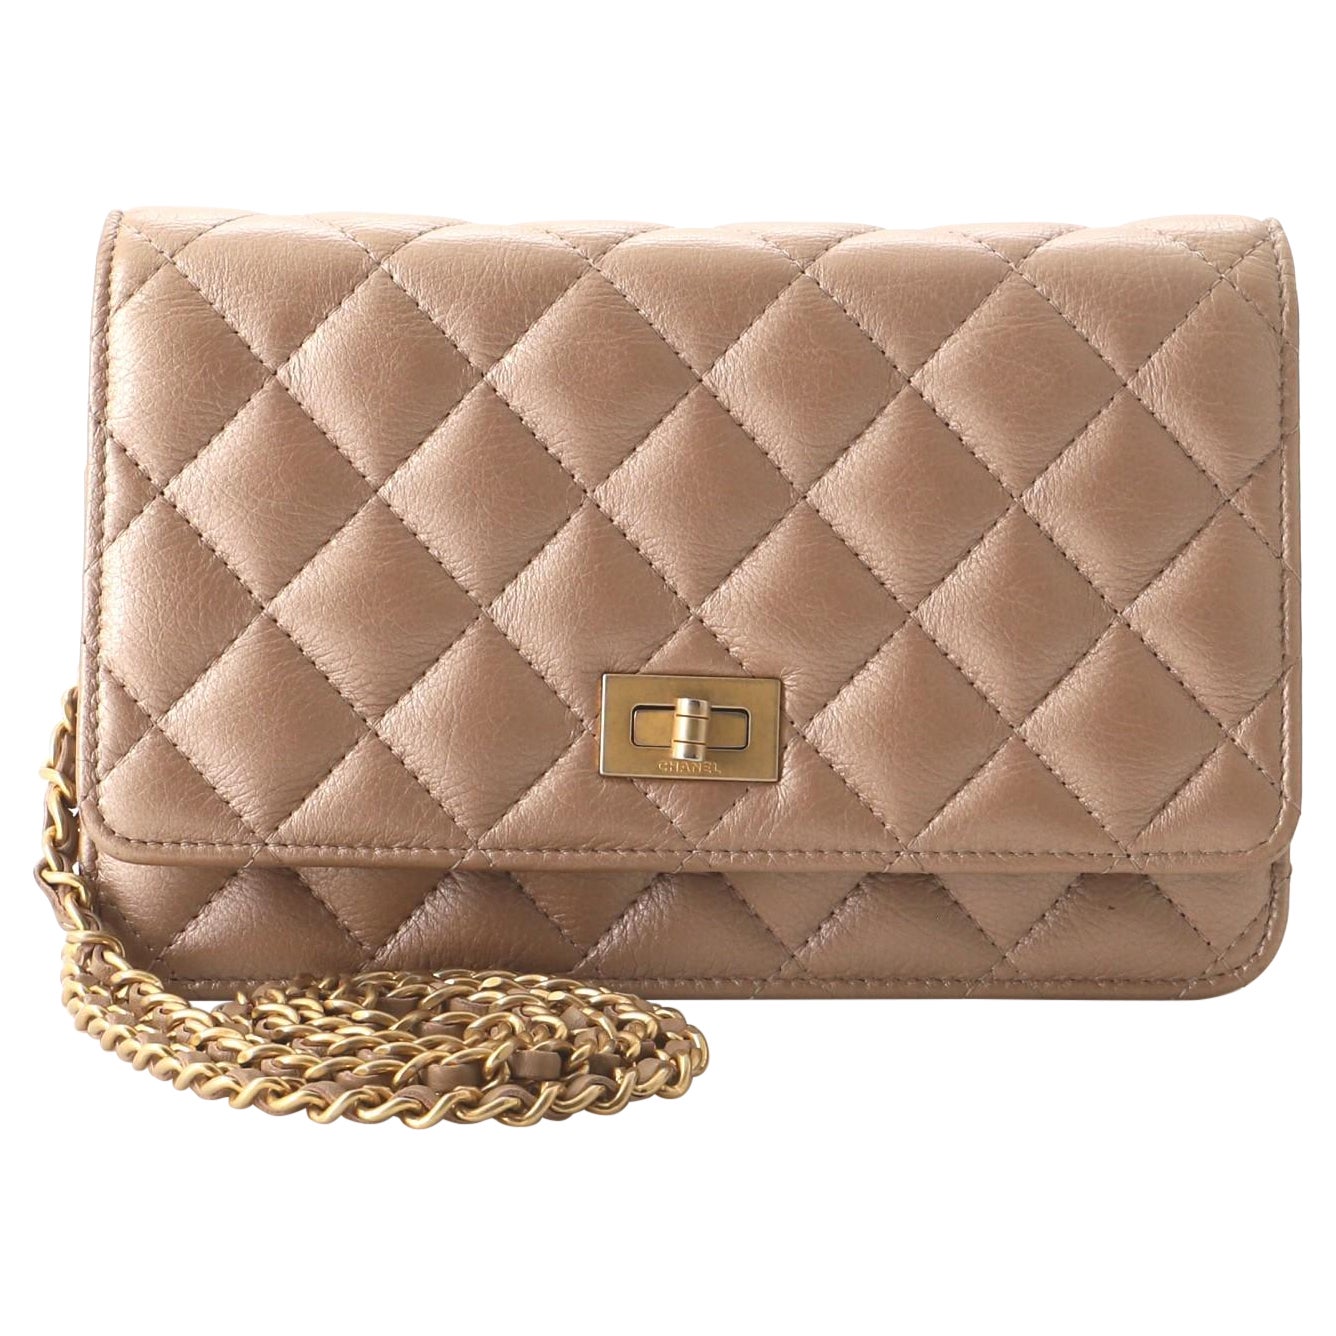 CHANEL Aged Calfskin Chevron Quilted 2.55 Reissue Mini Flap Black 991320